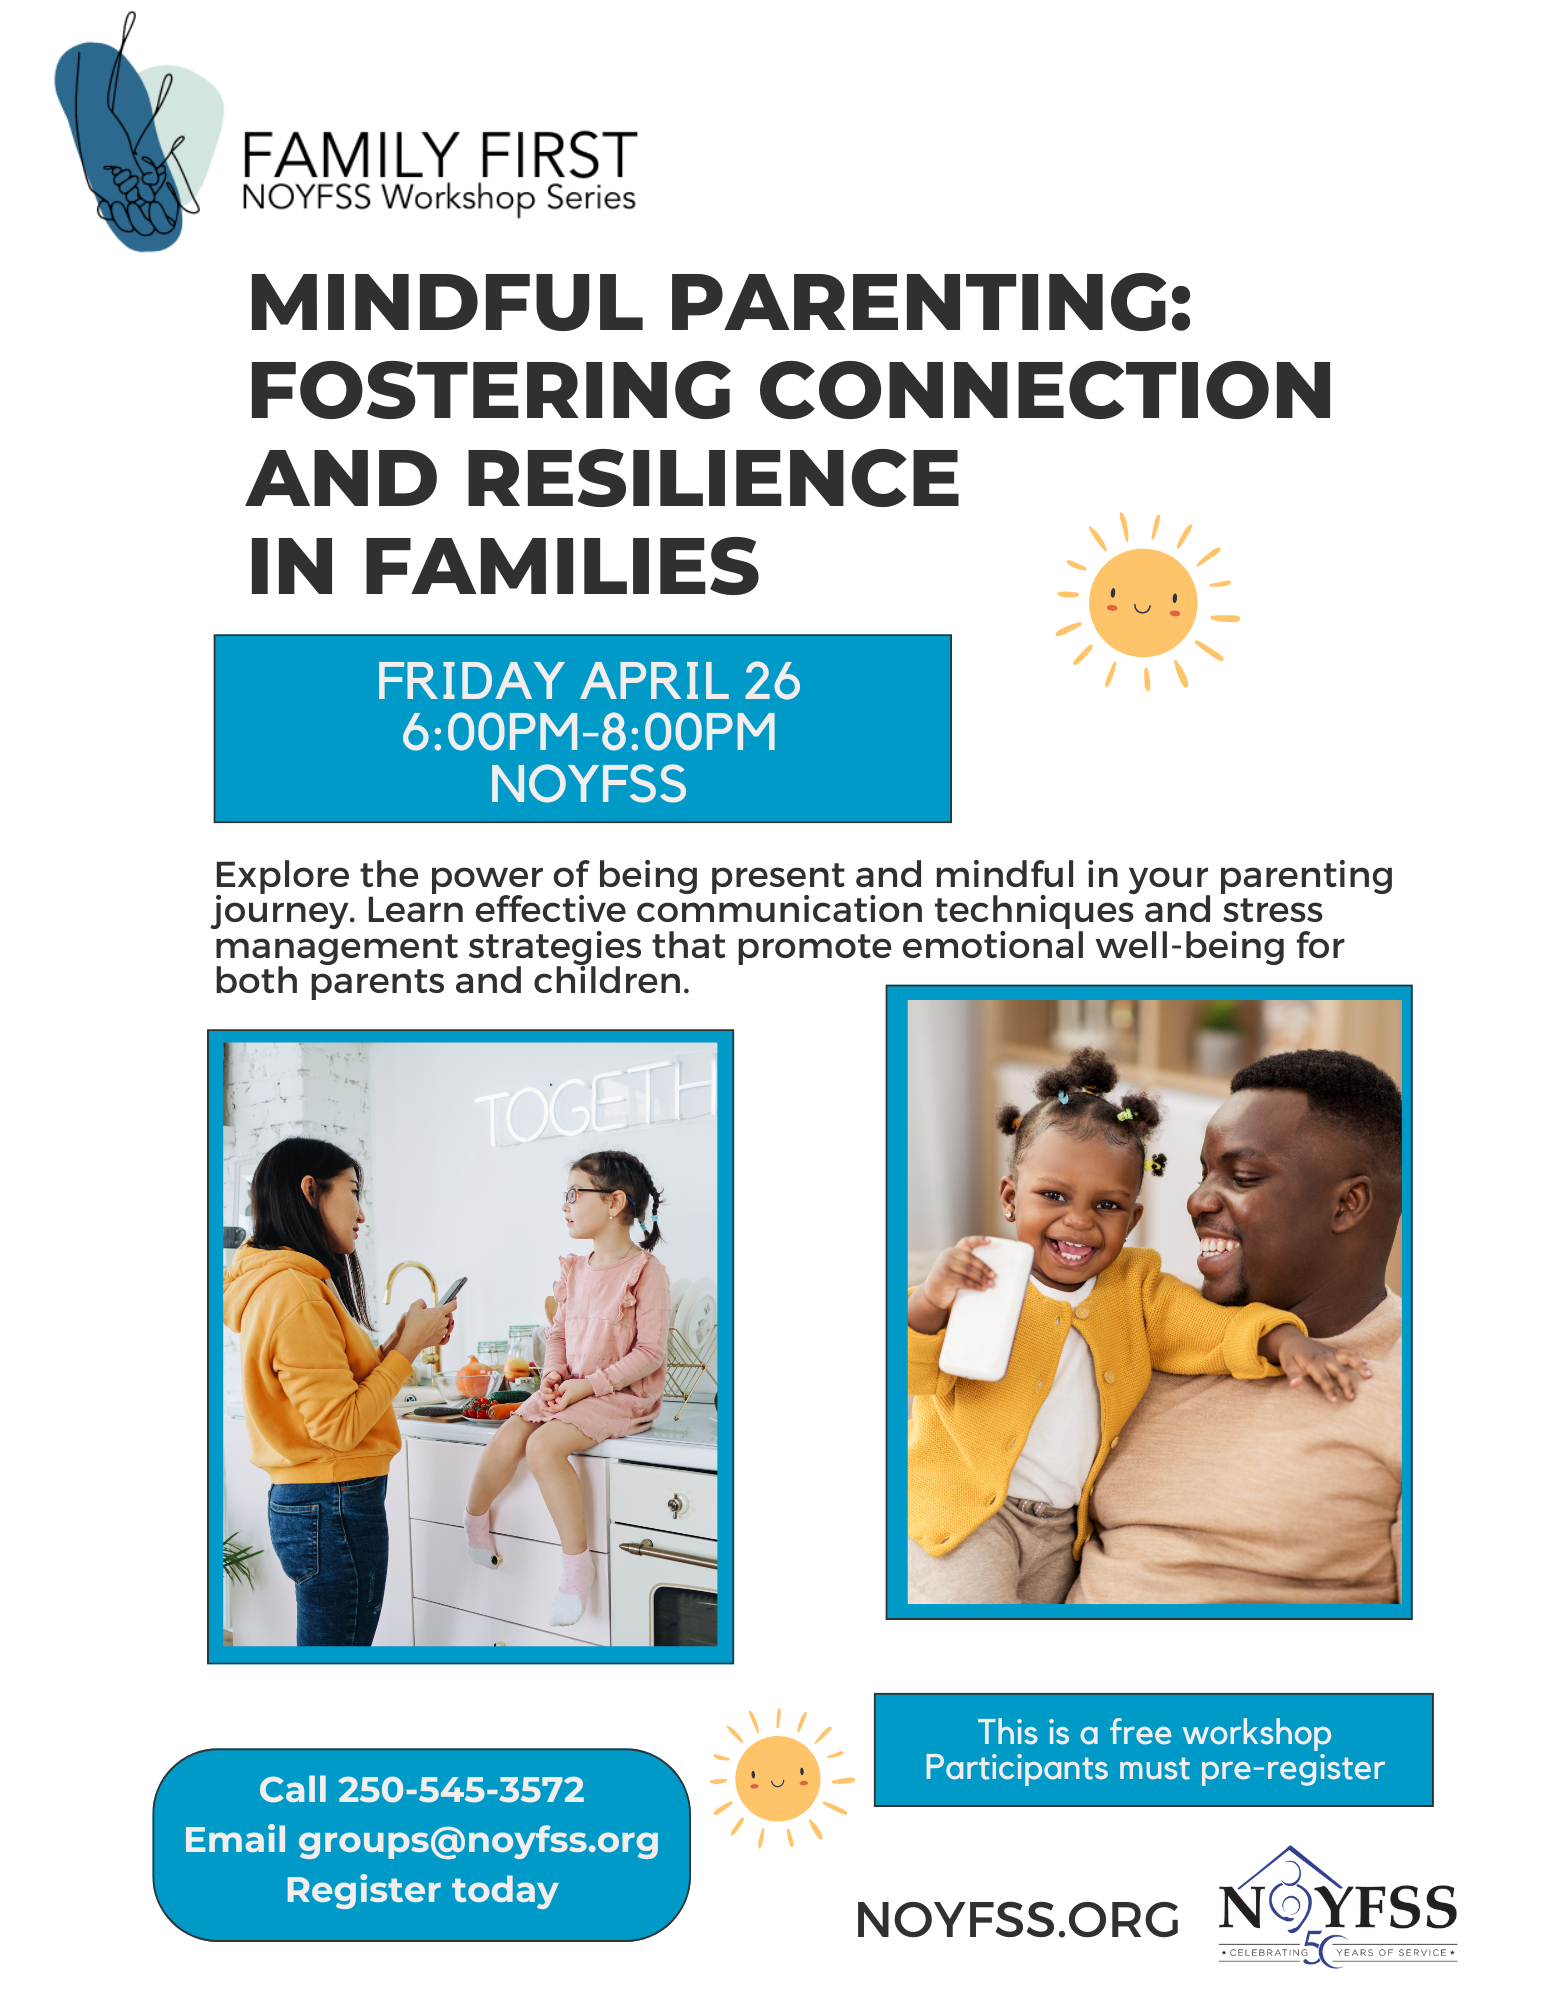 Free Workshop – Mindful Parenting: Fostering Connection and Resilience in Families